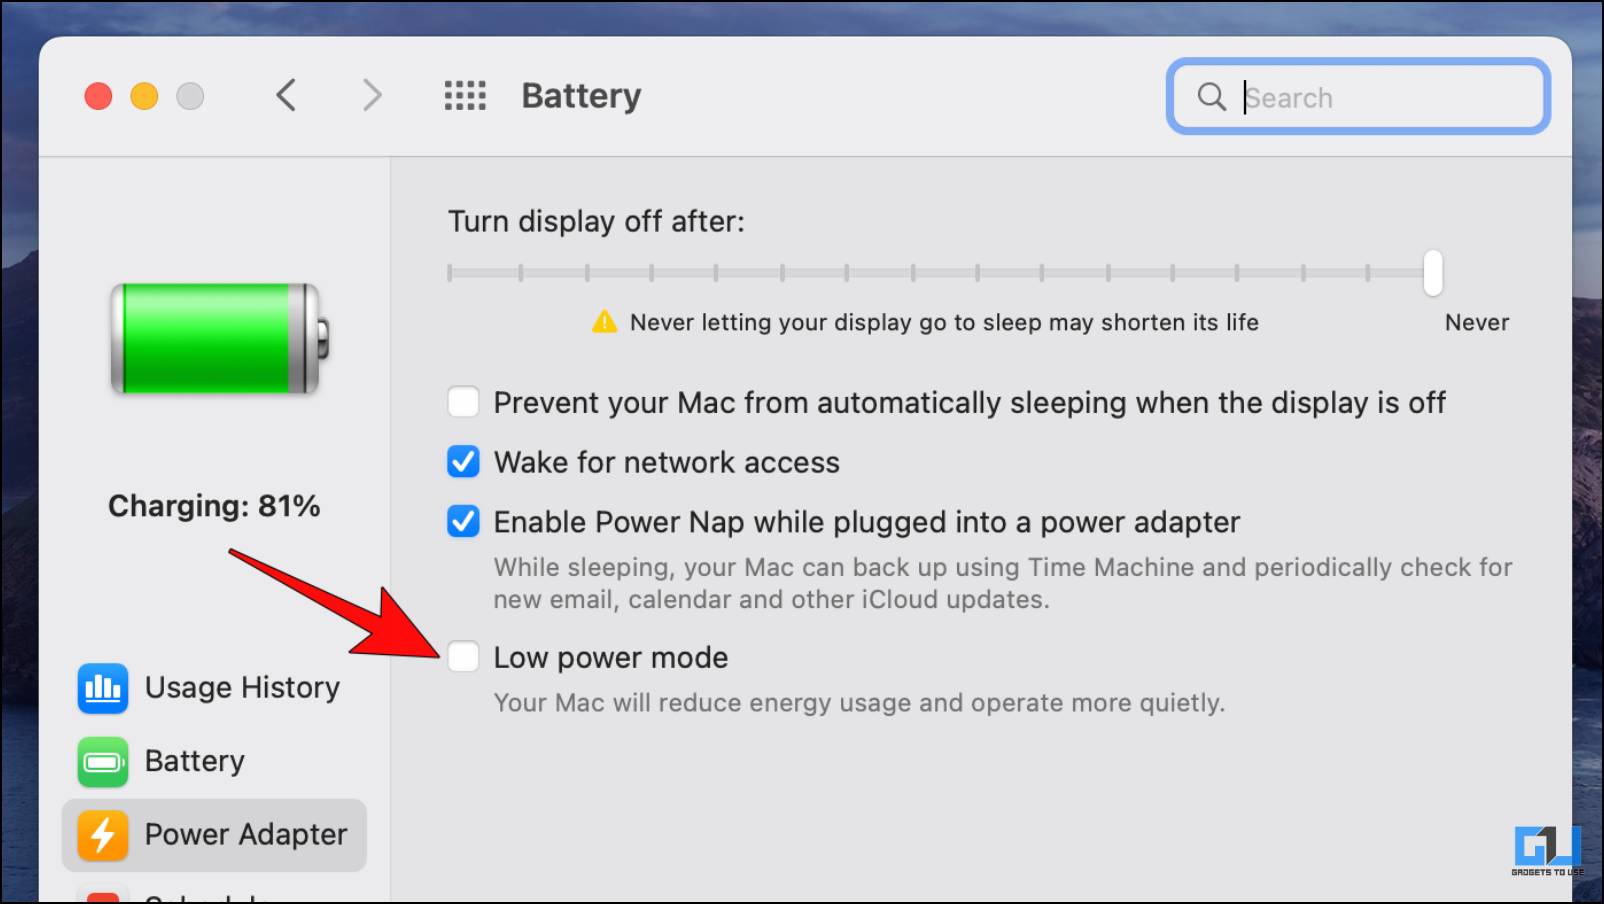 Uncheck the Box next to Low Power Mode